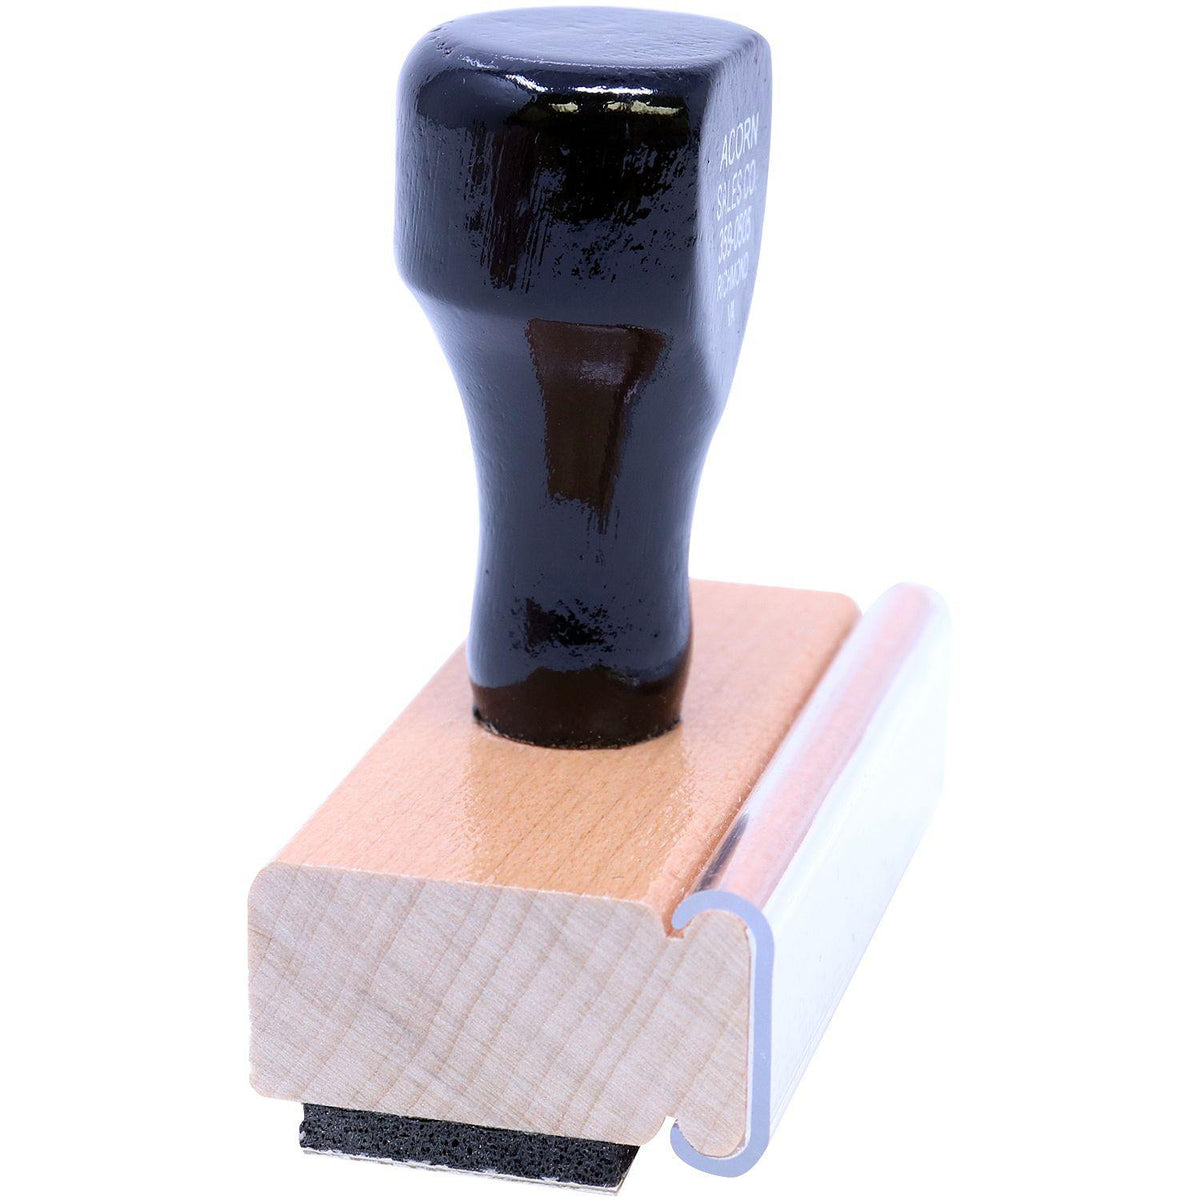 Side View of Large Kaiser Rubber Stamp at an Angle